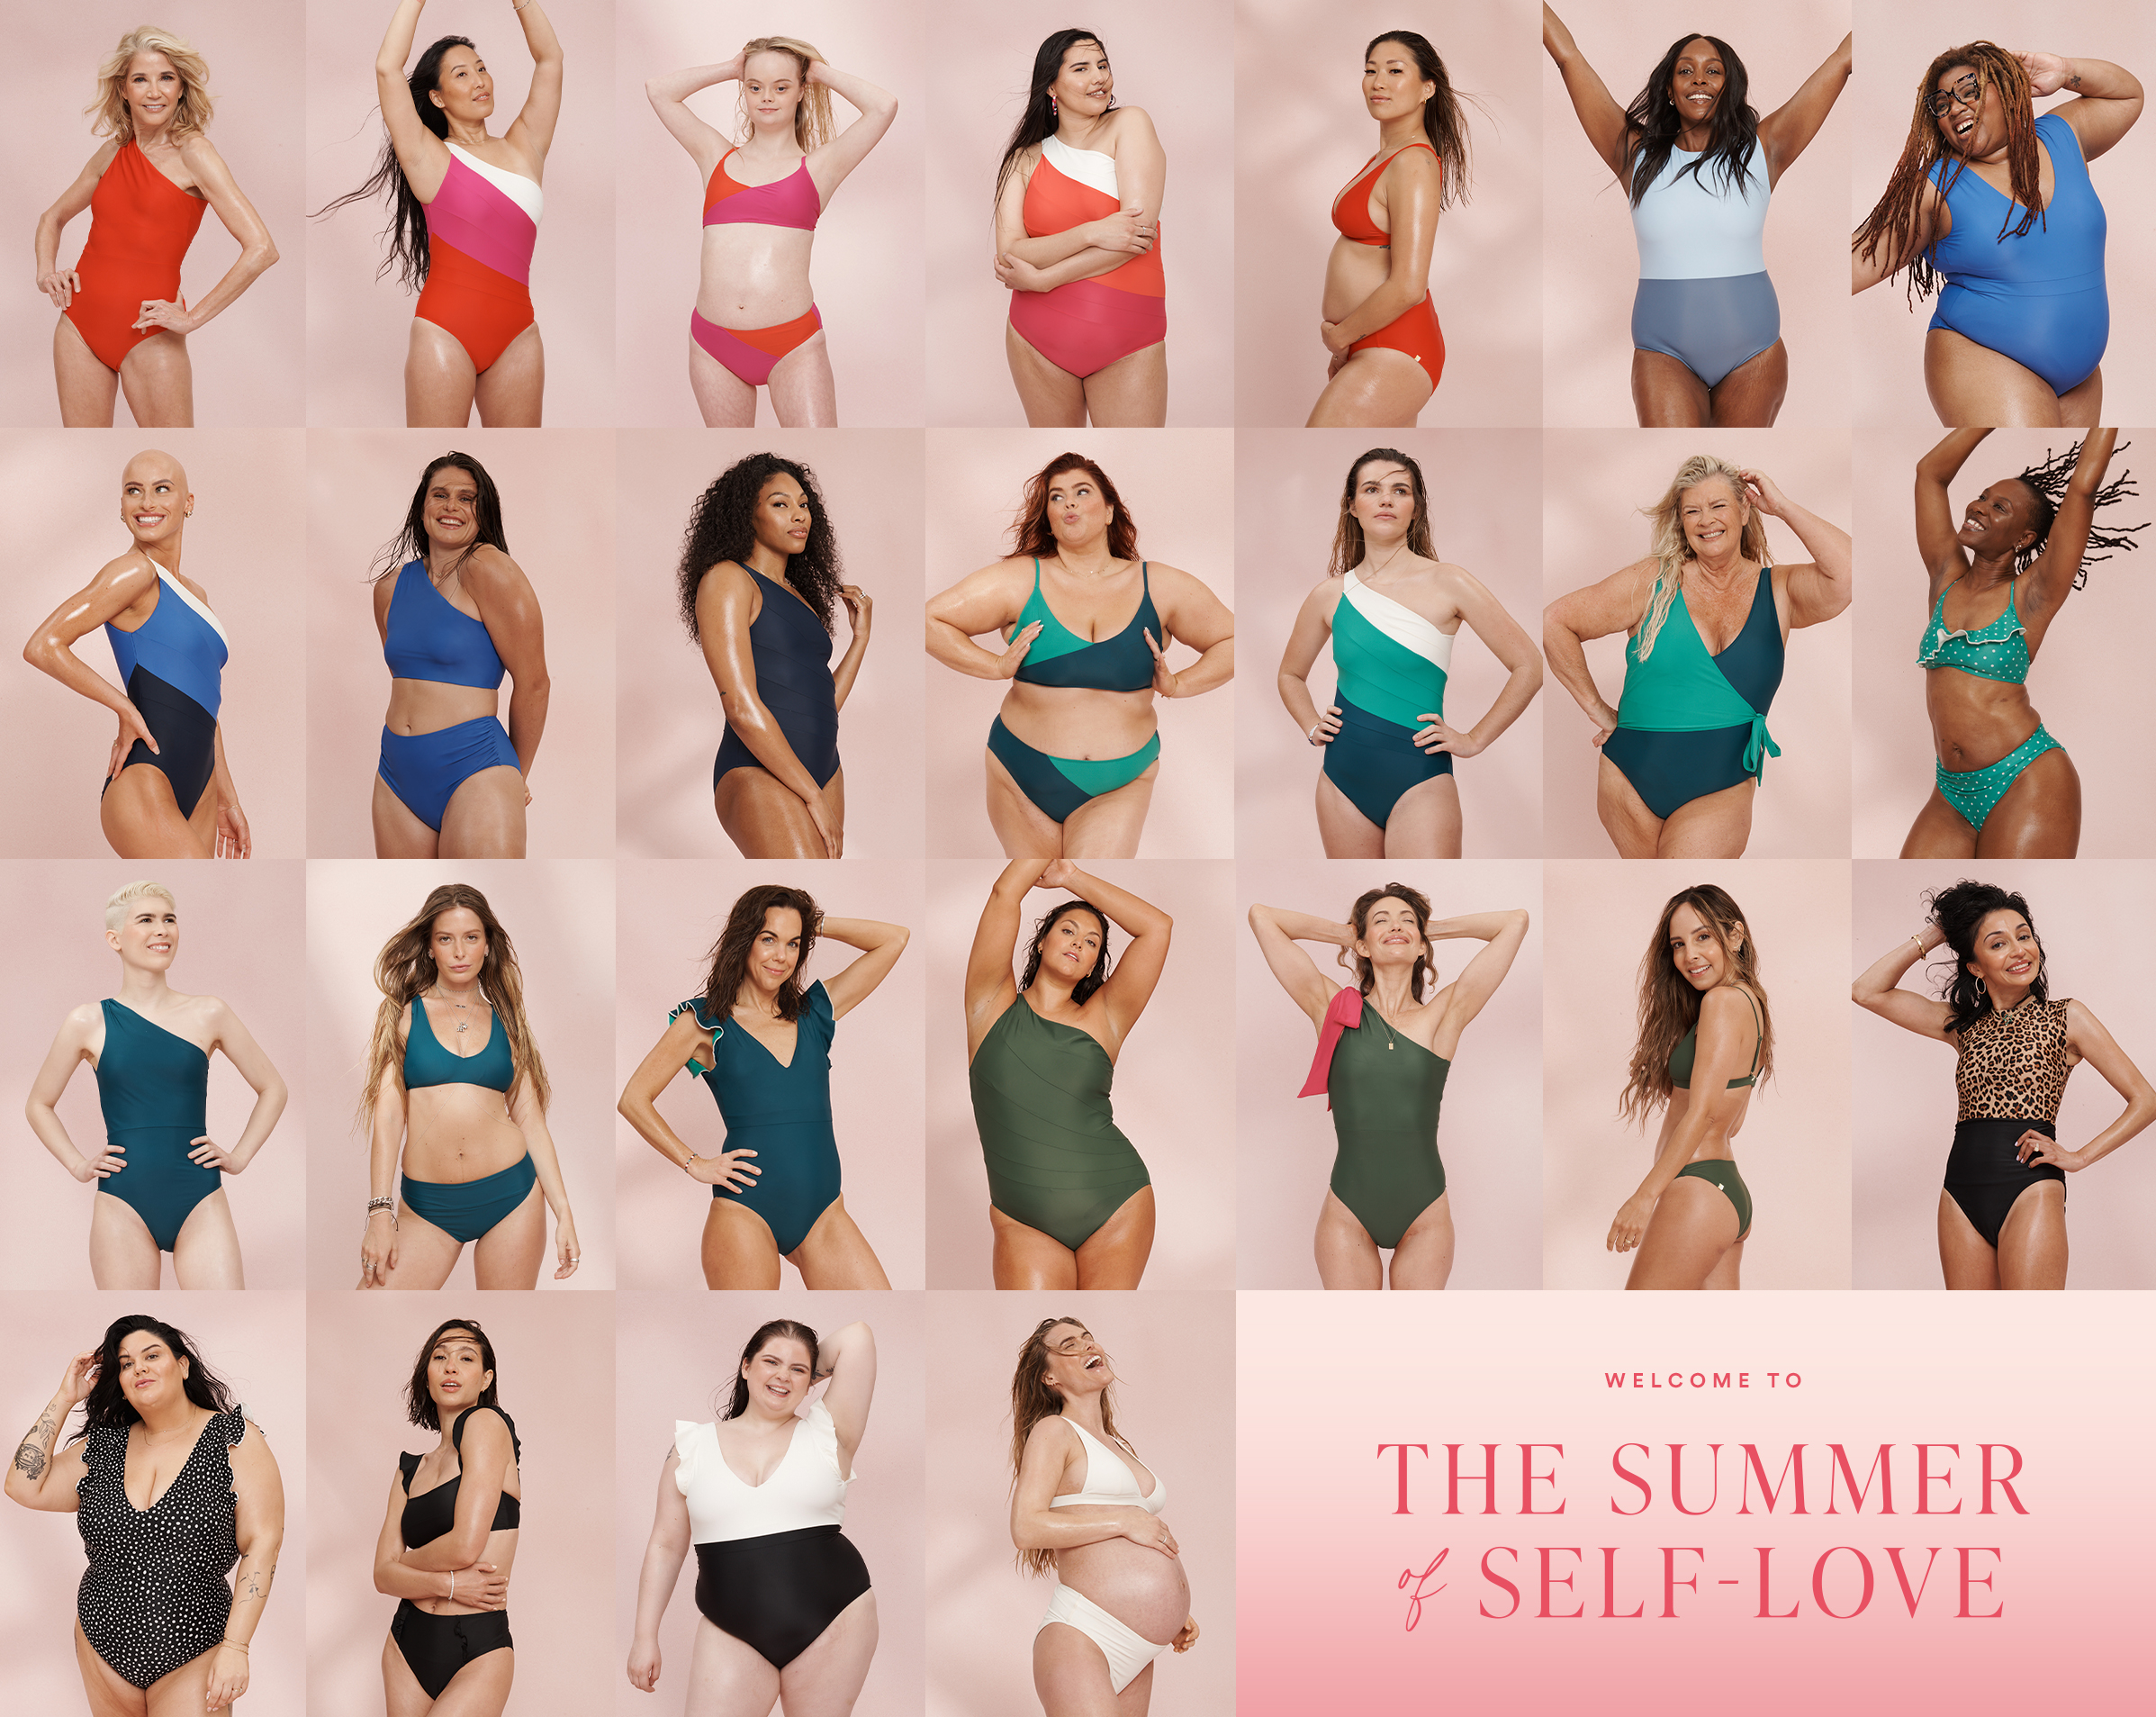 Summersalt Unveils Annual “Every Body is a Summersalt Body” Campaign